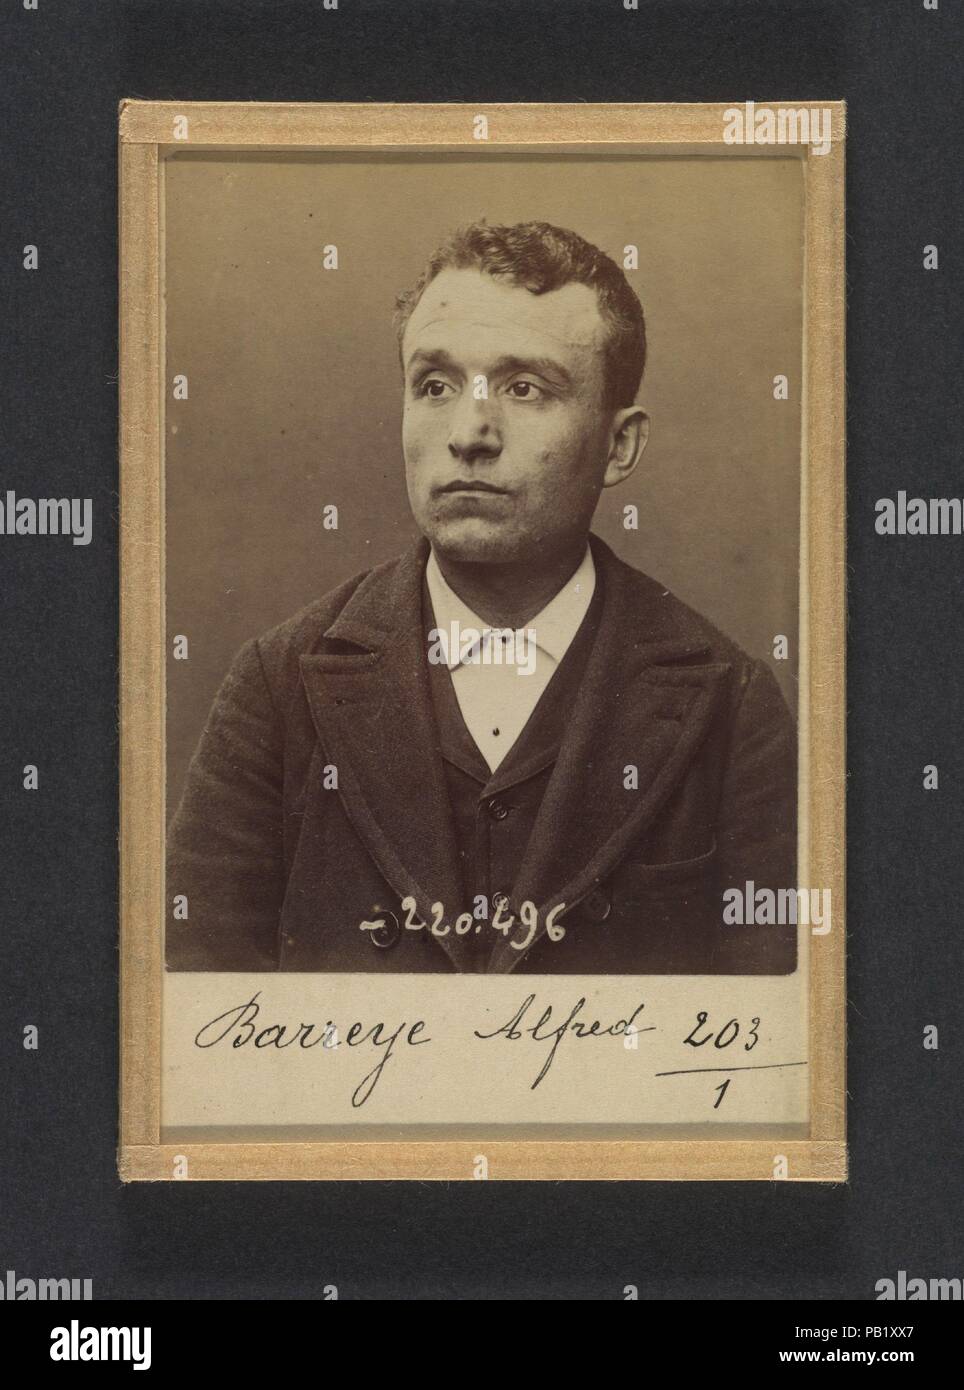 Barreyre. Alfred. 30 ans, né le 30/6/64 à Brassac (P. de Dôme). Gérant de restaurant. Anarchiste. 2/7/94. Artist: Alphonse Bertillon (French, 1853-1914). Dimensions: 10.5 x 7 x 0.5 cm (4 1/8 x 2 3/4 x 3/16 in.) each. Date: 1894.  Born into a distinguished family of scientists and statisticians, Bertillon began his career as a clerk in the Identification Bureau of the Paris Prefecture of Police in 1879. Tasked with maintaining reliable police records of offenders, he developed the first modern system of criminal identification. The system, which became known as Bertillonage, had three component Stock Photo